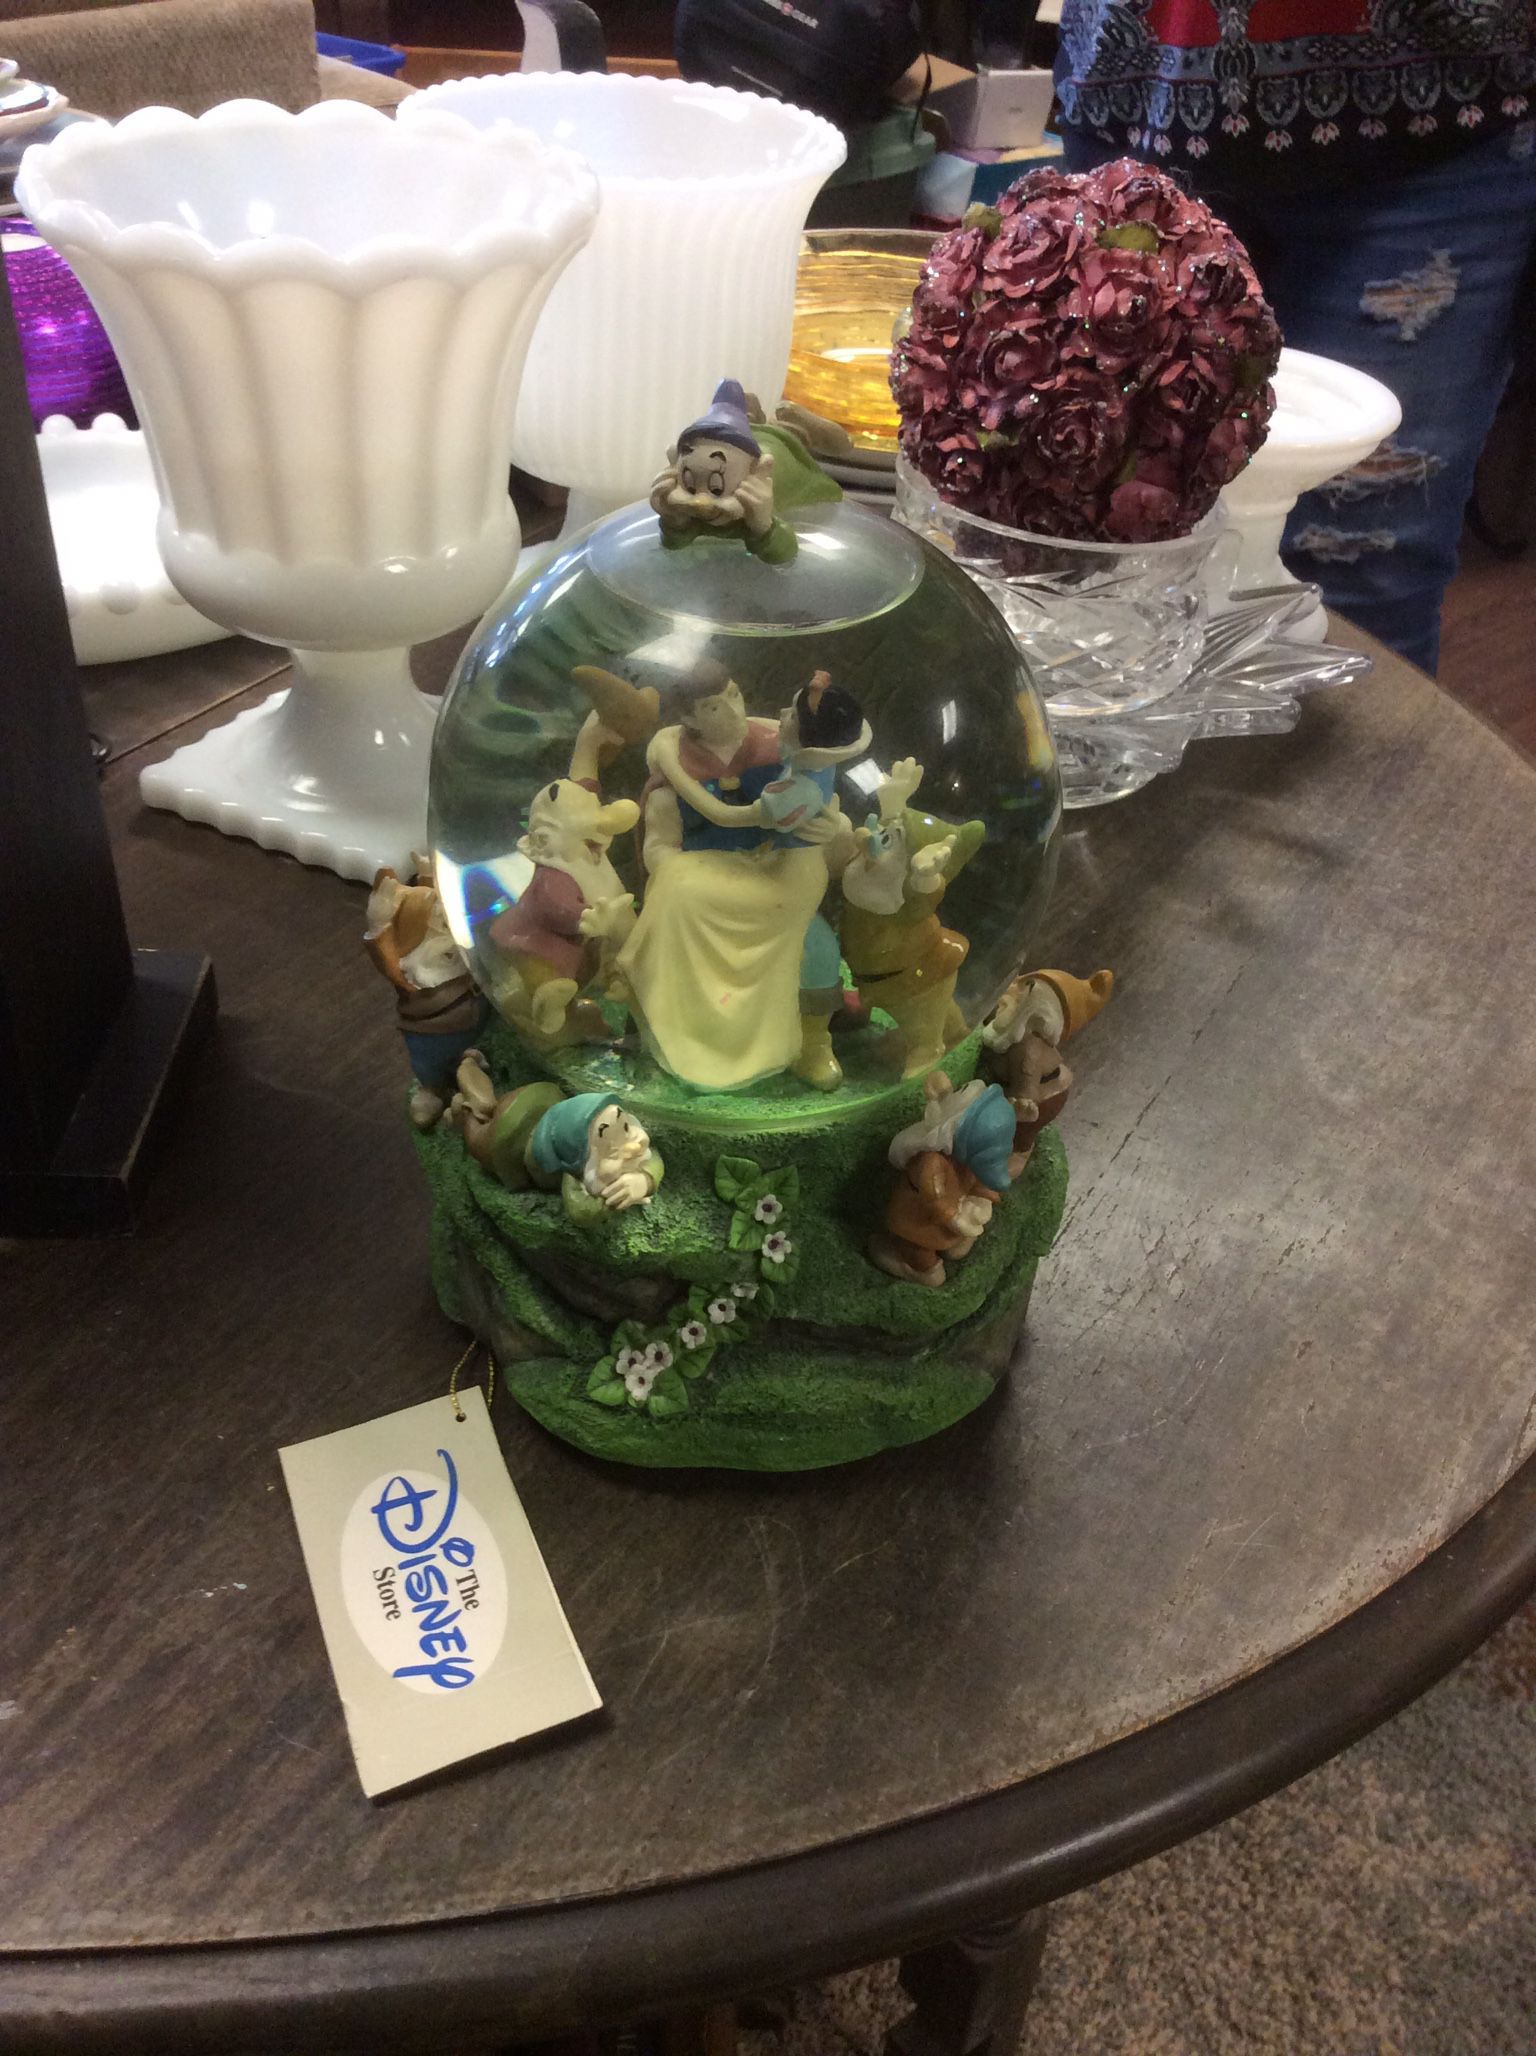 Disney’s Snow White and the Seven Dwarves Snow Globe “Someday My Prince will Come”